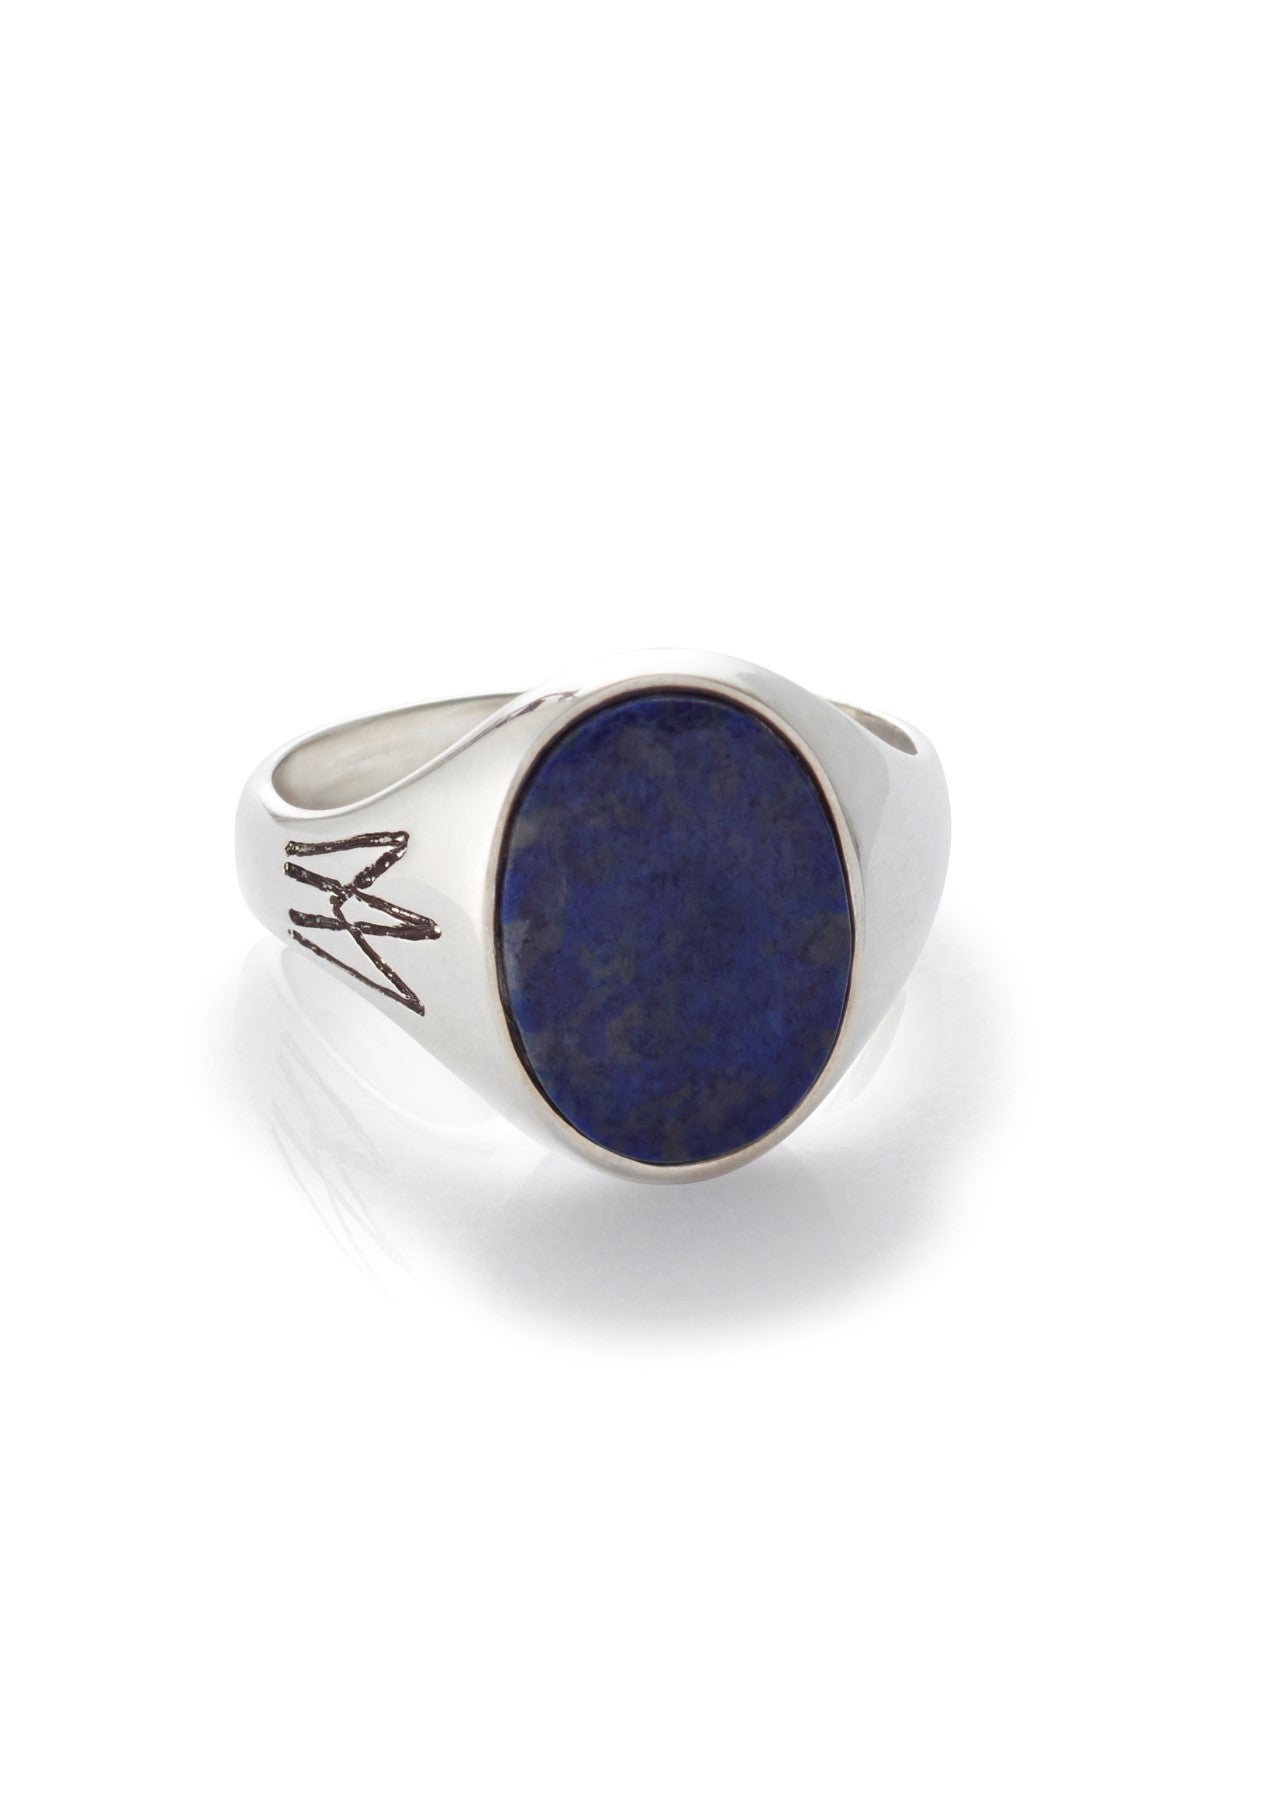 Unisex ring with lapis in silver